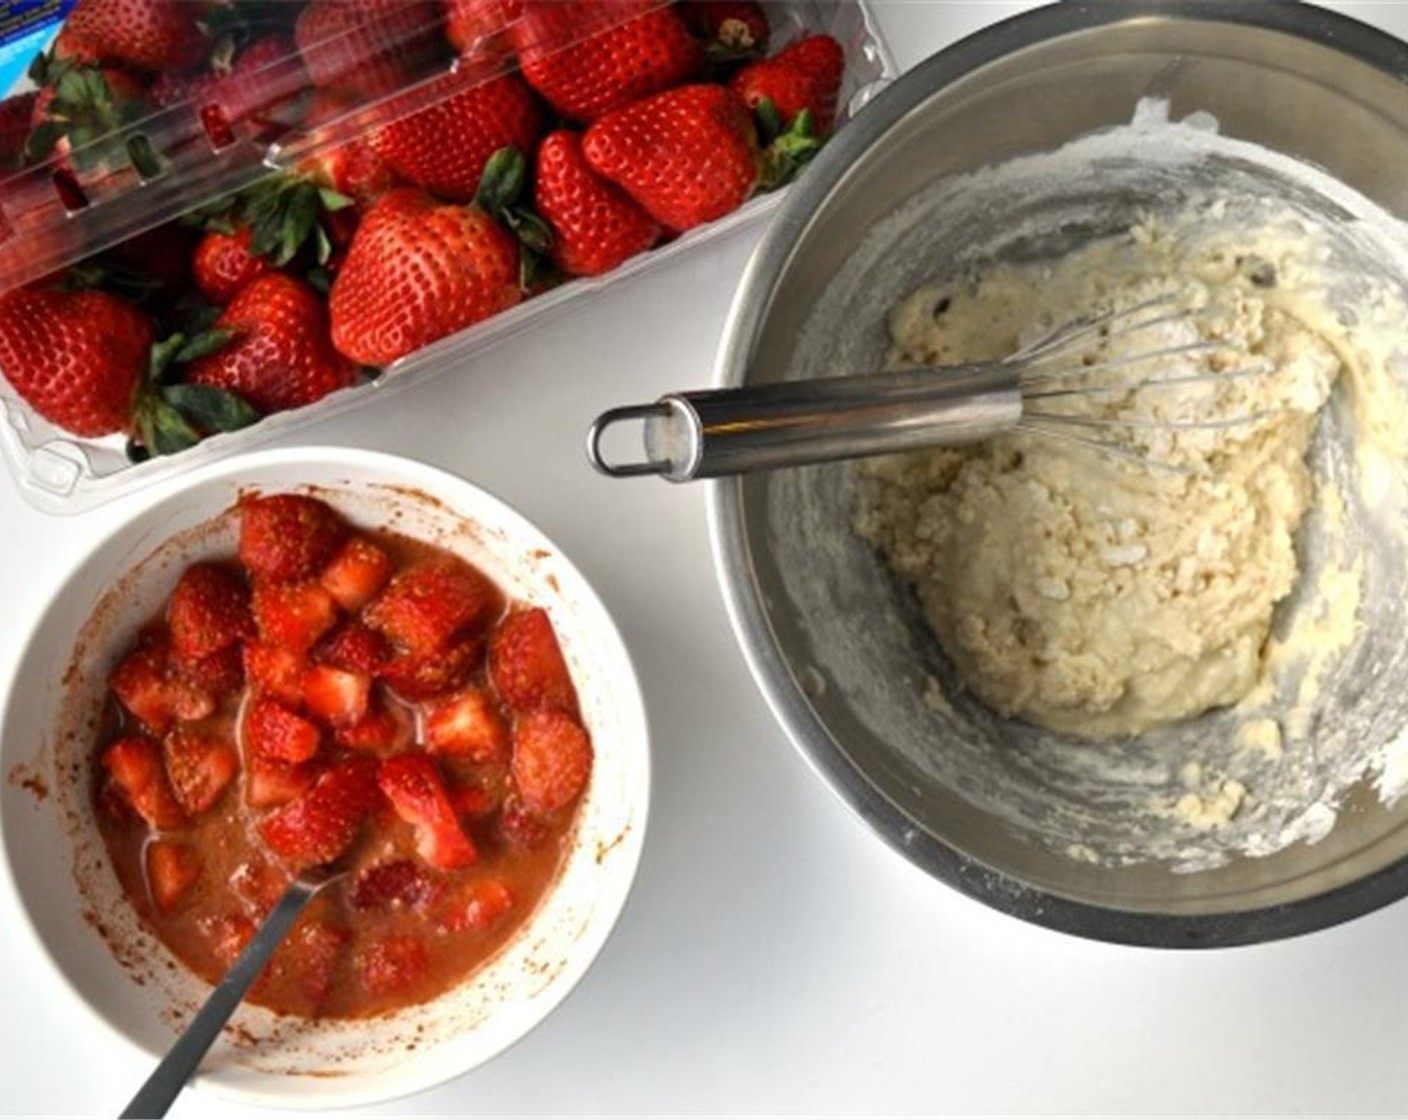 step 2 In a small bowl, combine Fresh Strawberries (2 cups), Water (1/2 cup), Granulated Sugar (1/3 cup), juice from Lemon (1) and Ground Cinnamon (1/2 tsp).